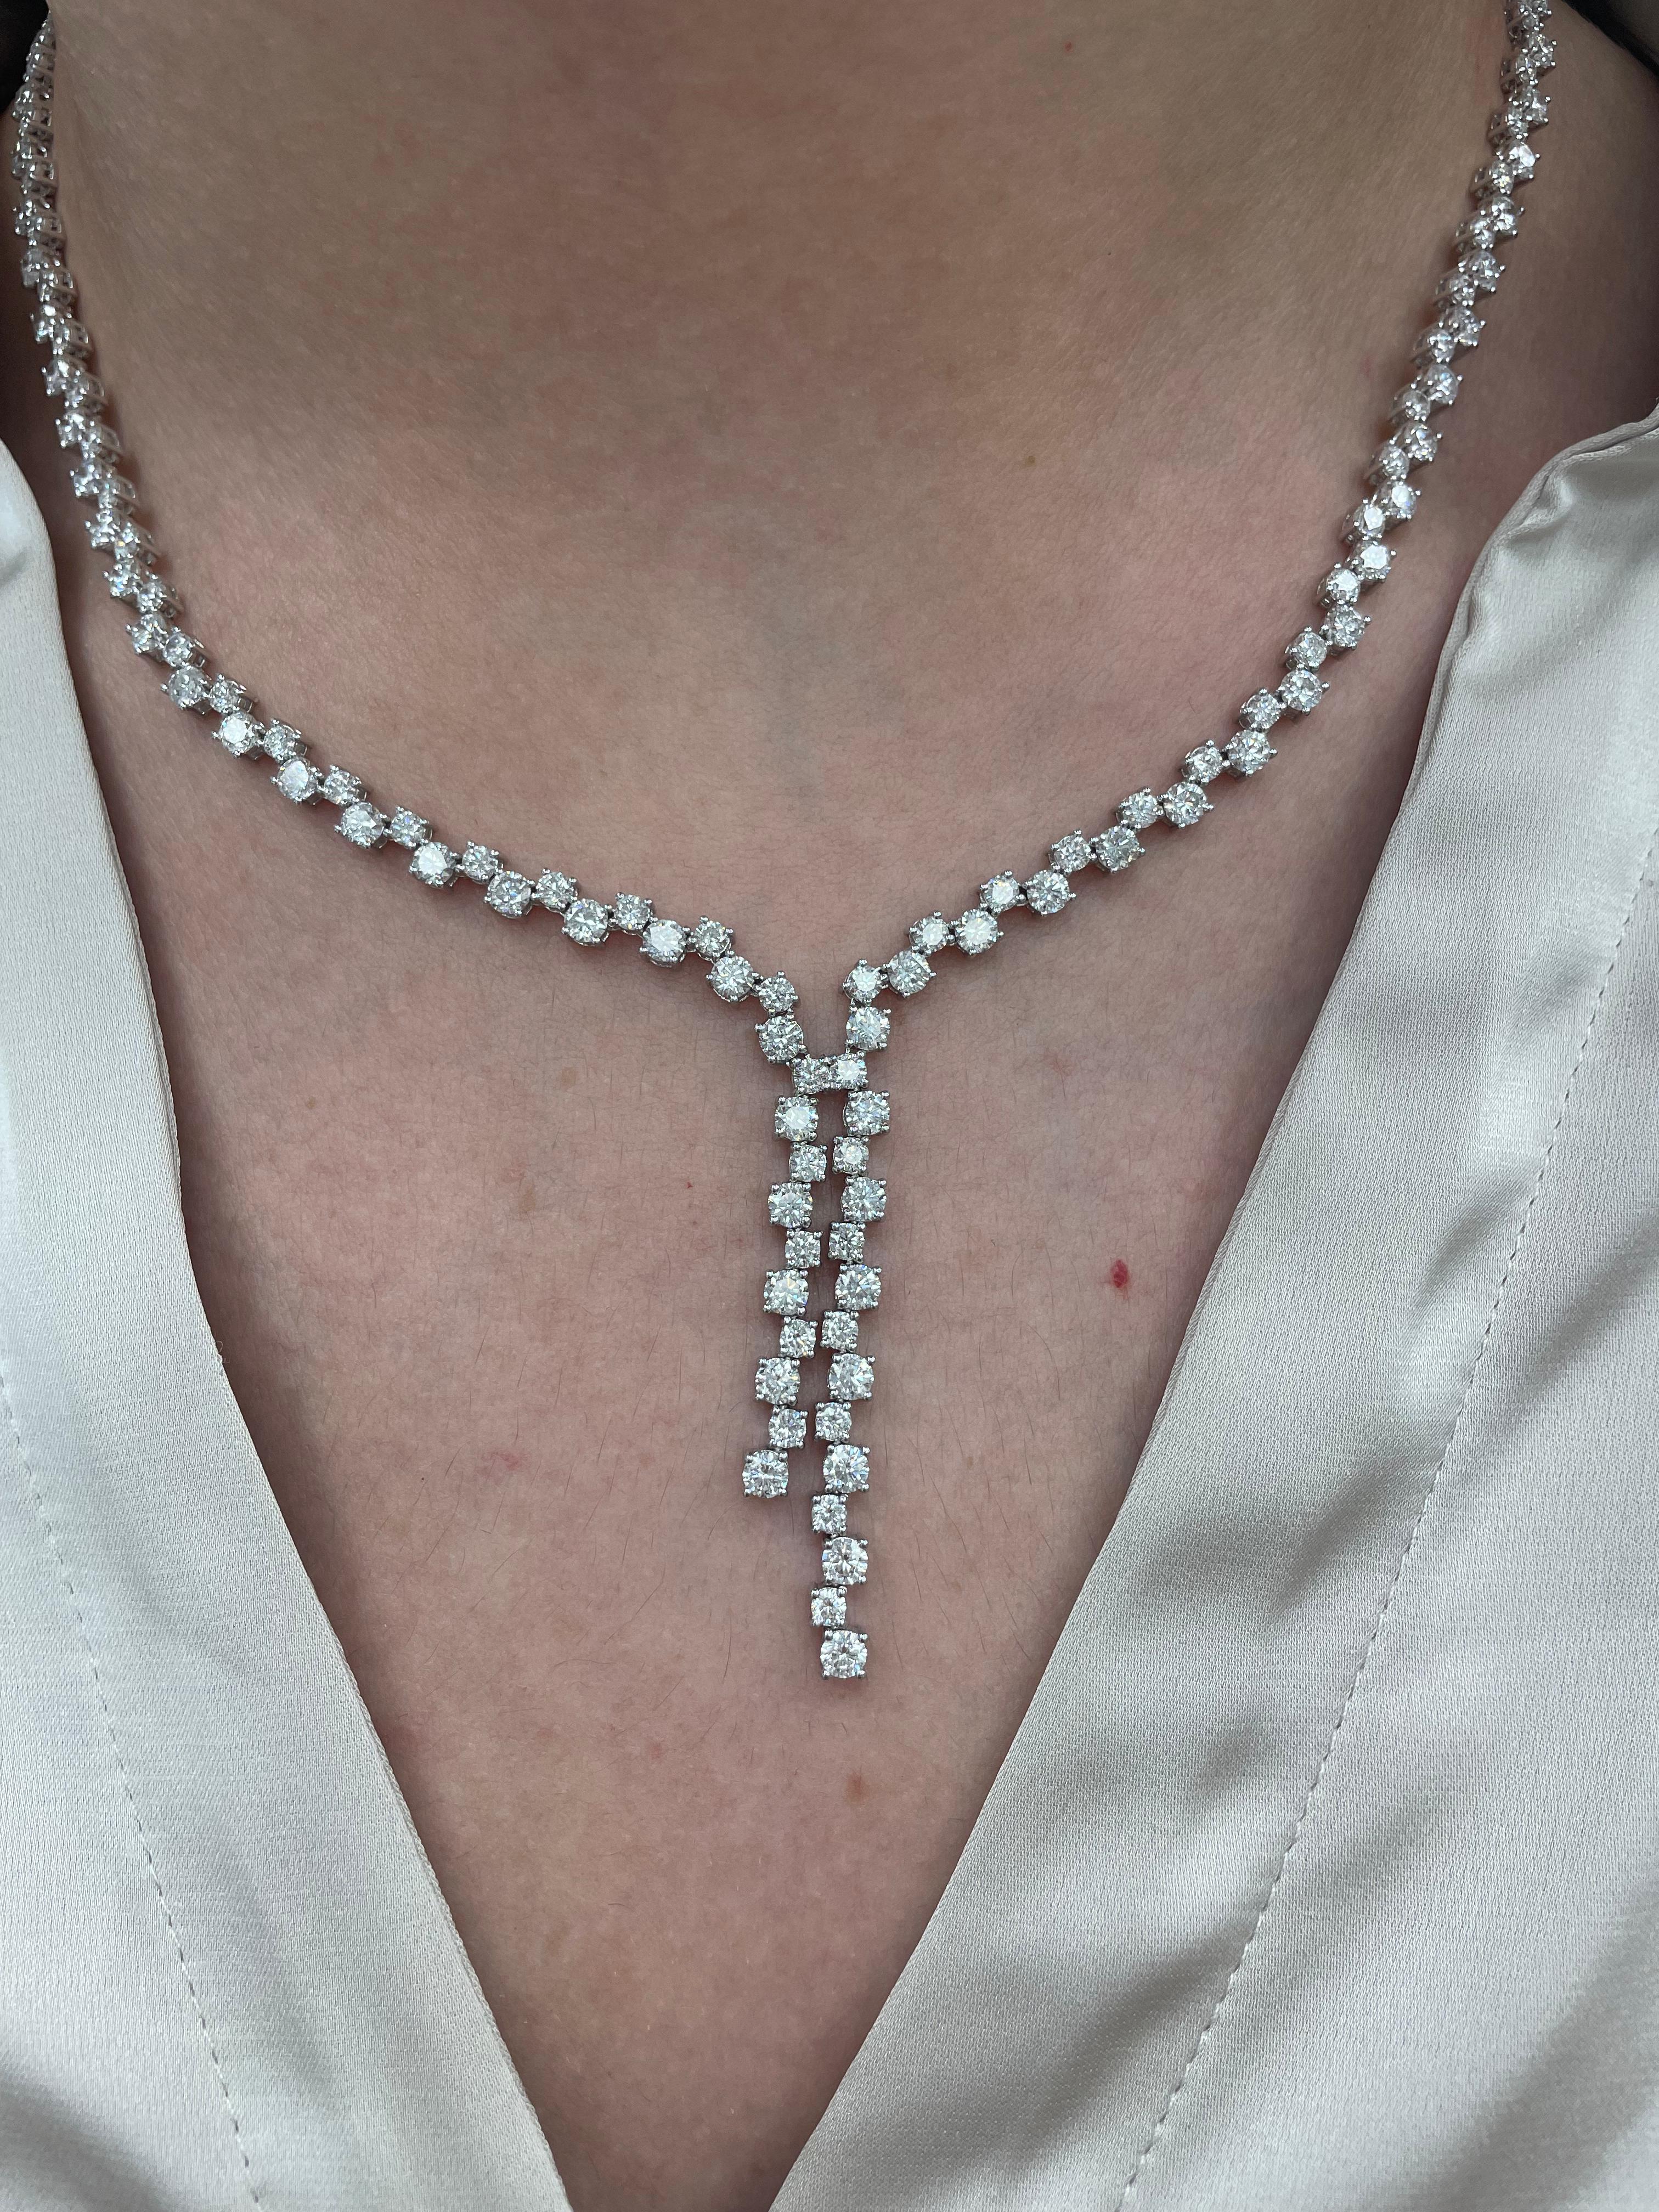 Exquisite diamond rain-fall drop necklace, by Alexander Beverly Hills.
163 round brilliant cut diamonds, 13.20 carats total. Approximately D-F color and VS2/SI1 clarity. Prong set in 18k white gold, 23.02 grams, and 16 inches.
Accommodated with an